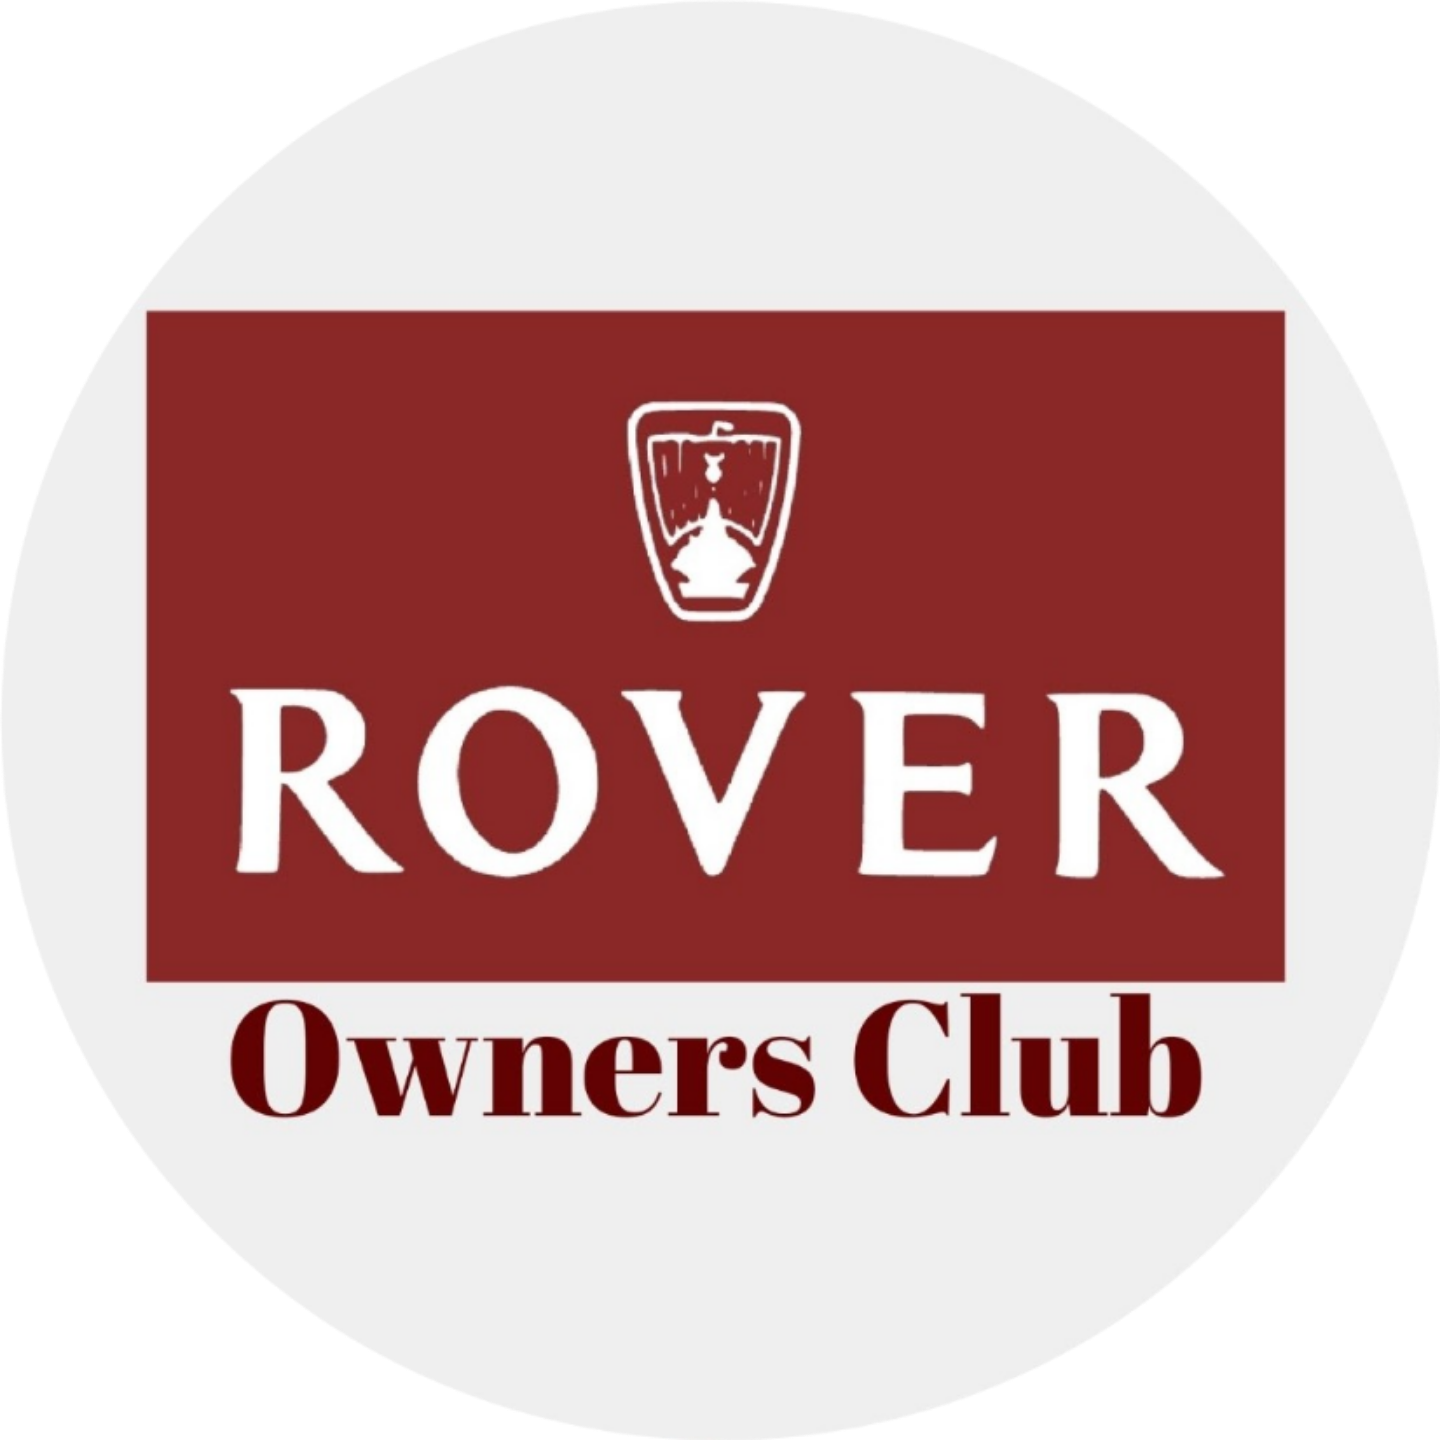 Rover Owners Club